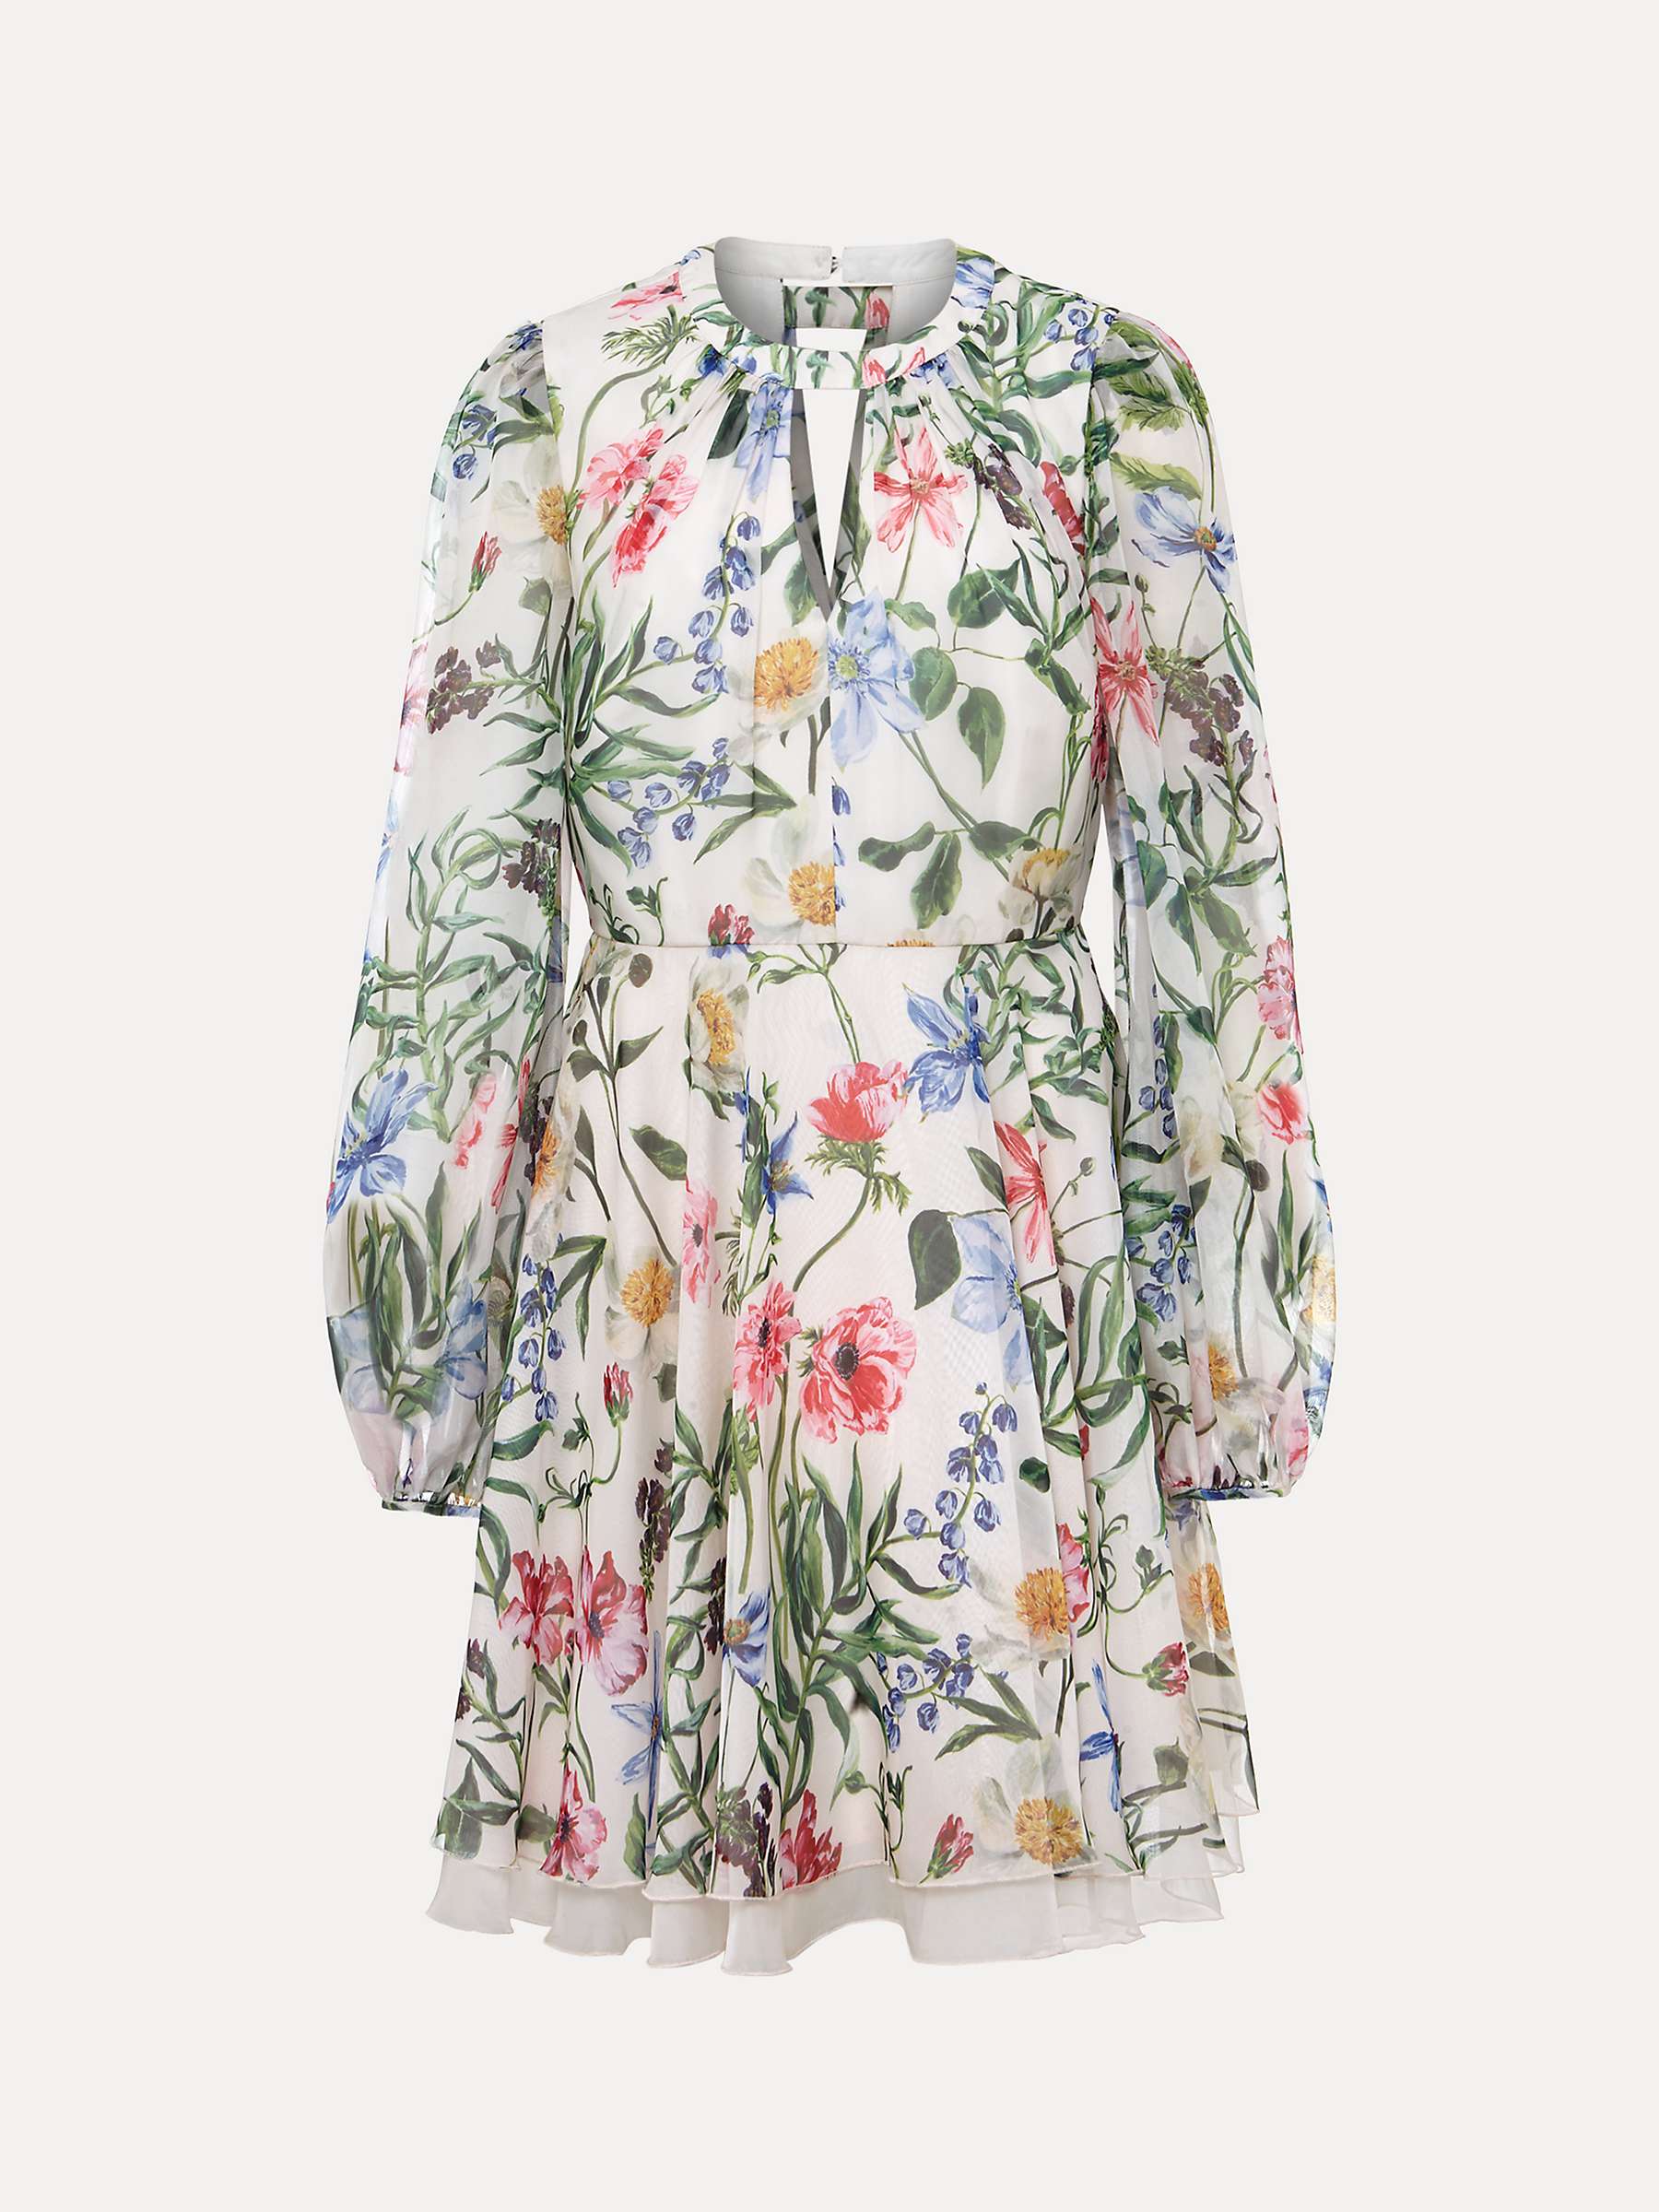 Buy Phase Eight Everleigh Chiffon Floral Mini Dress, Ivory/Multi Online at johnlewis.com